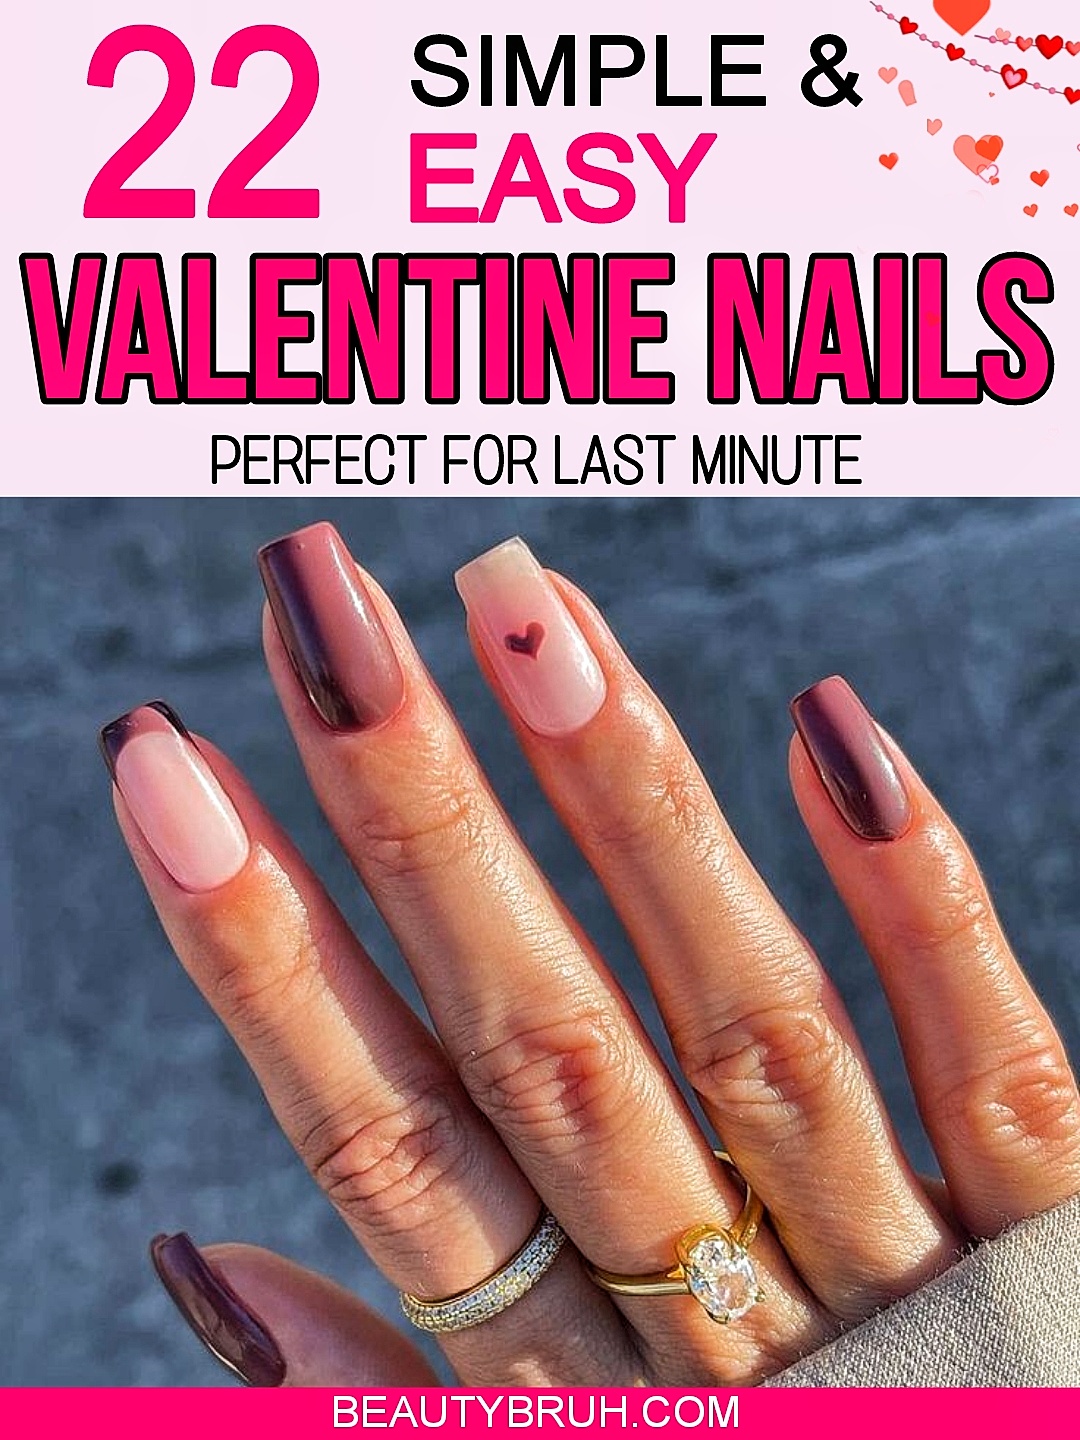 Easy Valentines Nails